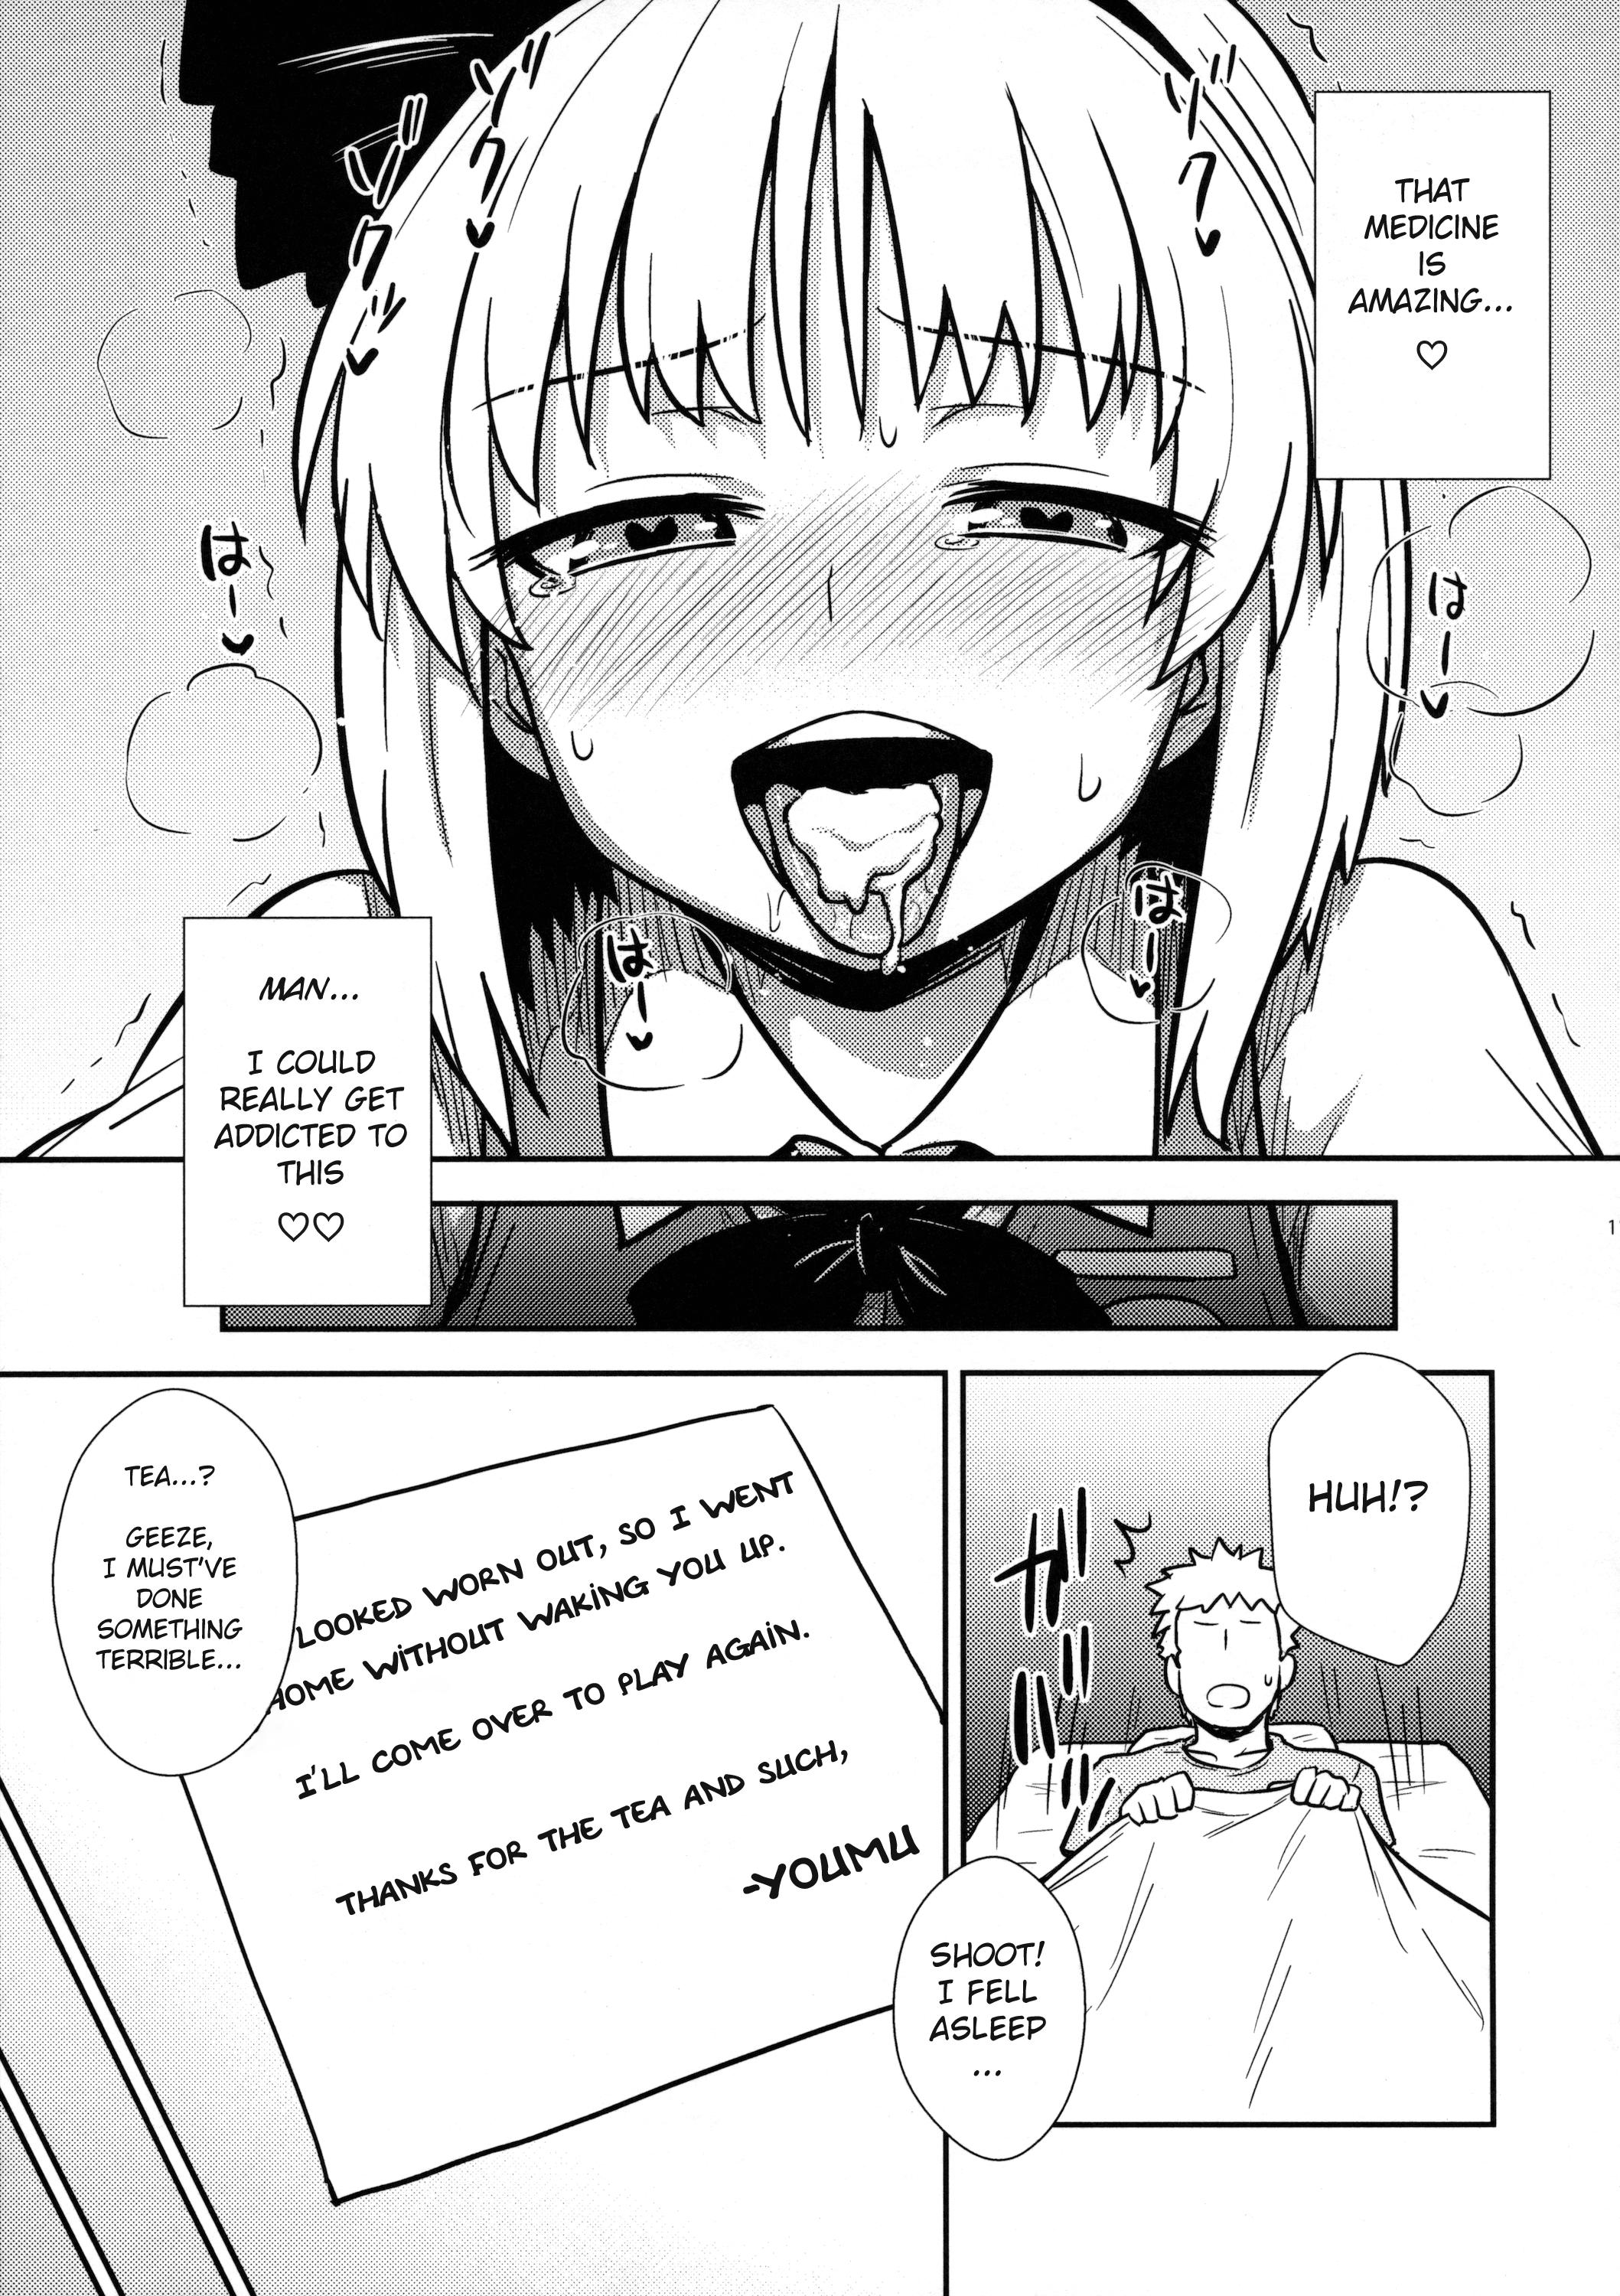 Best Blowjob Youmu's Coming of Age - Touhou project Bailando - Page 10